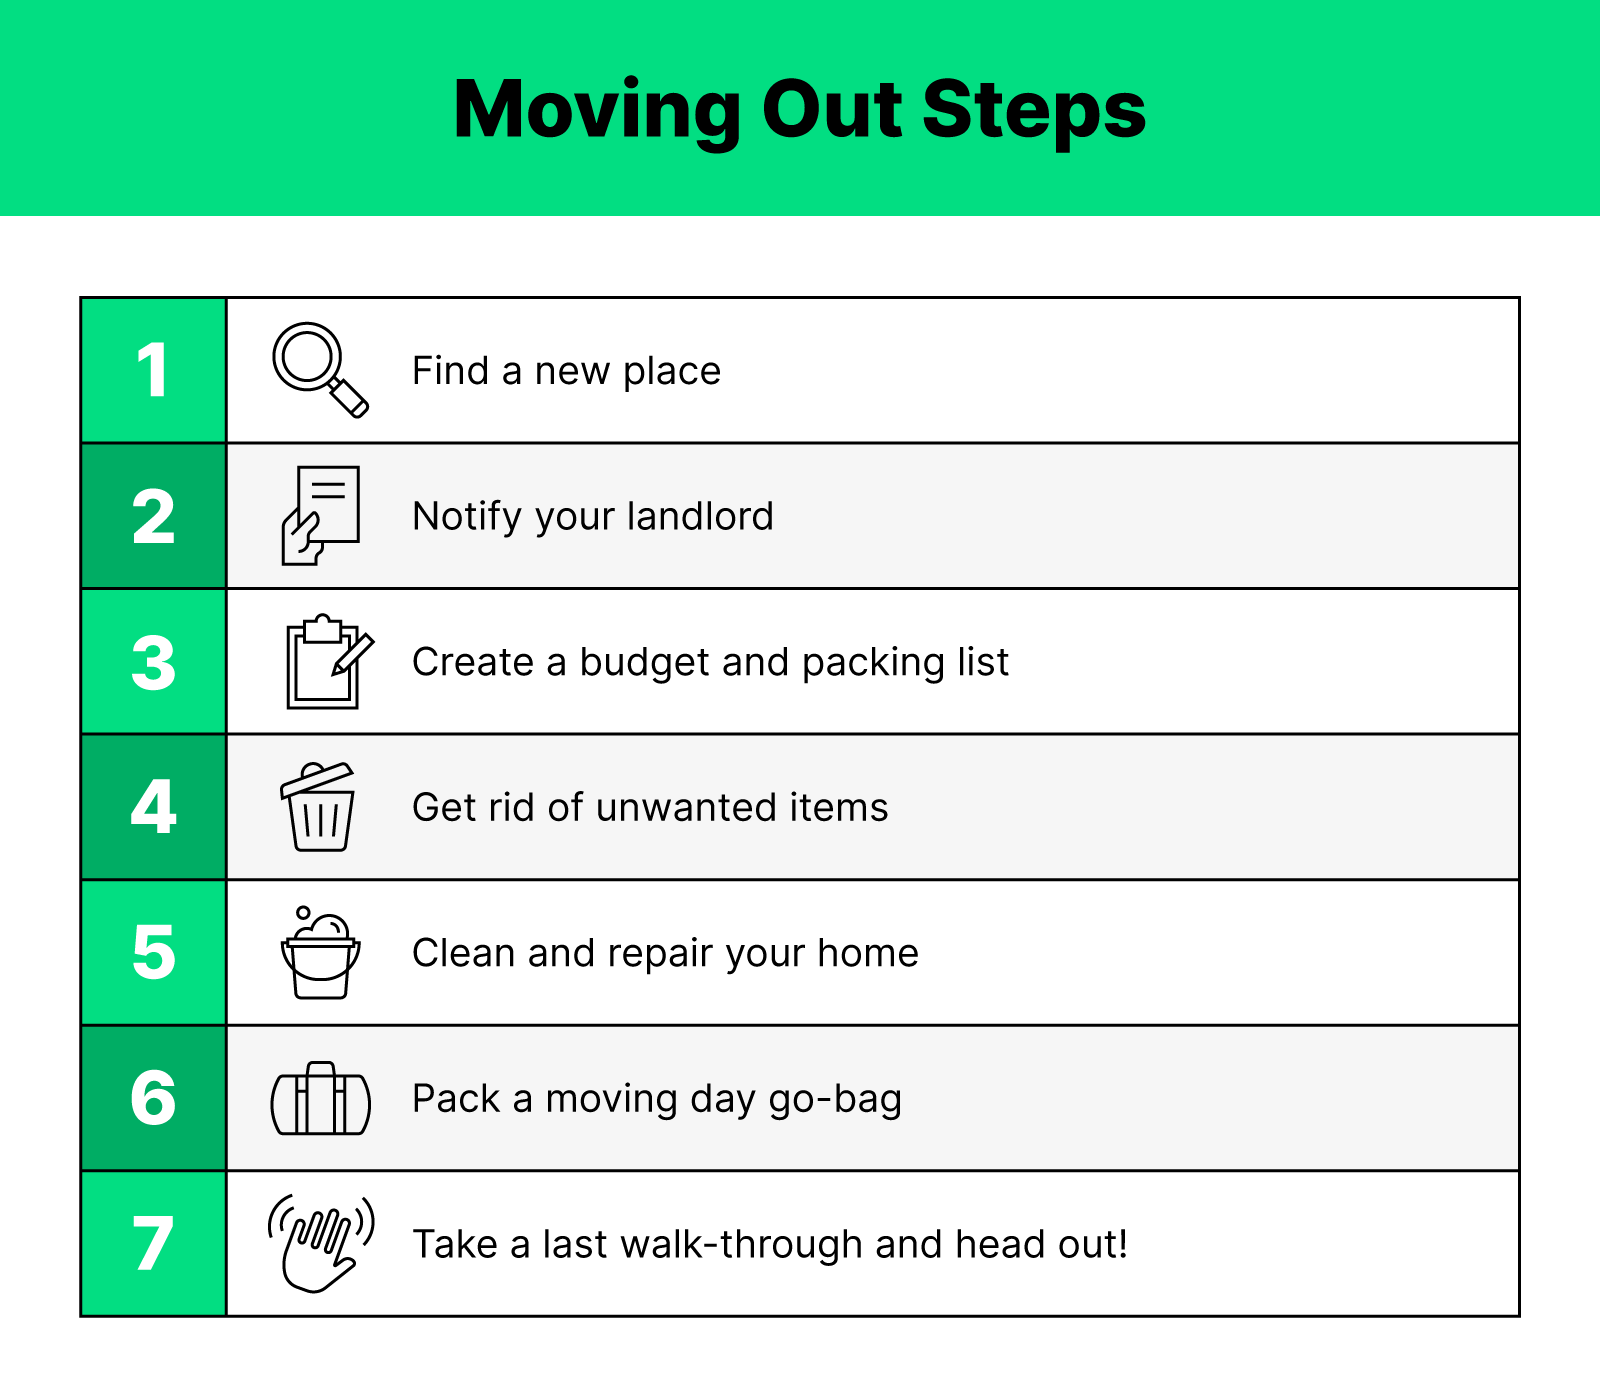 Green black and white graphic showing all the moving out steps with outlined illustrations of household items and hands 